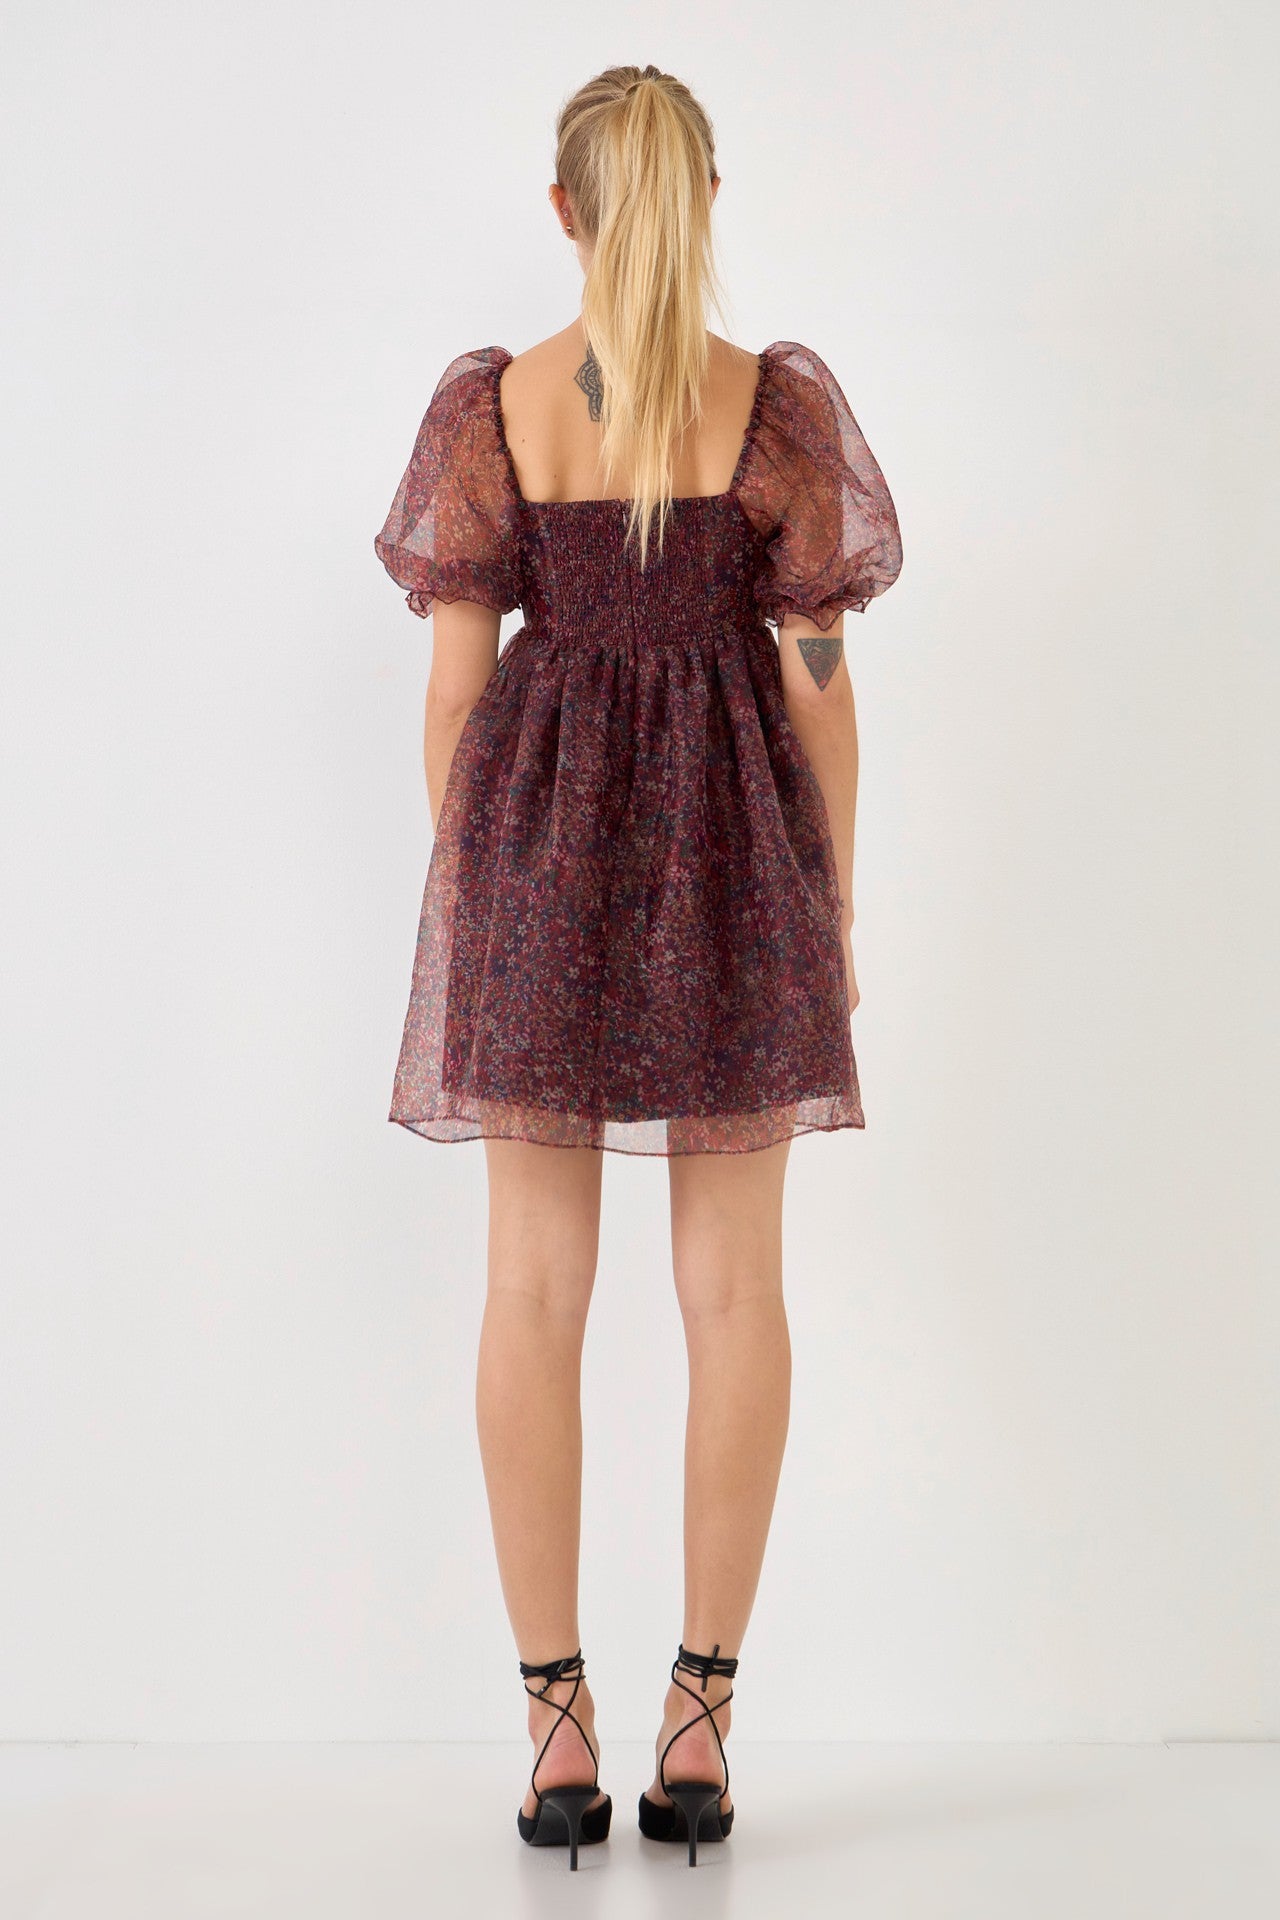 Orchard Blooms Dress